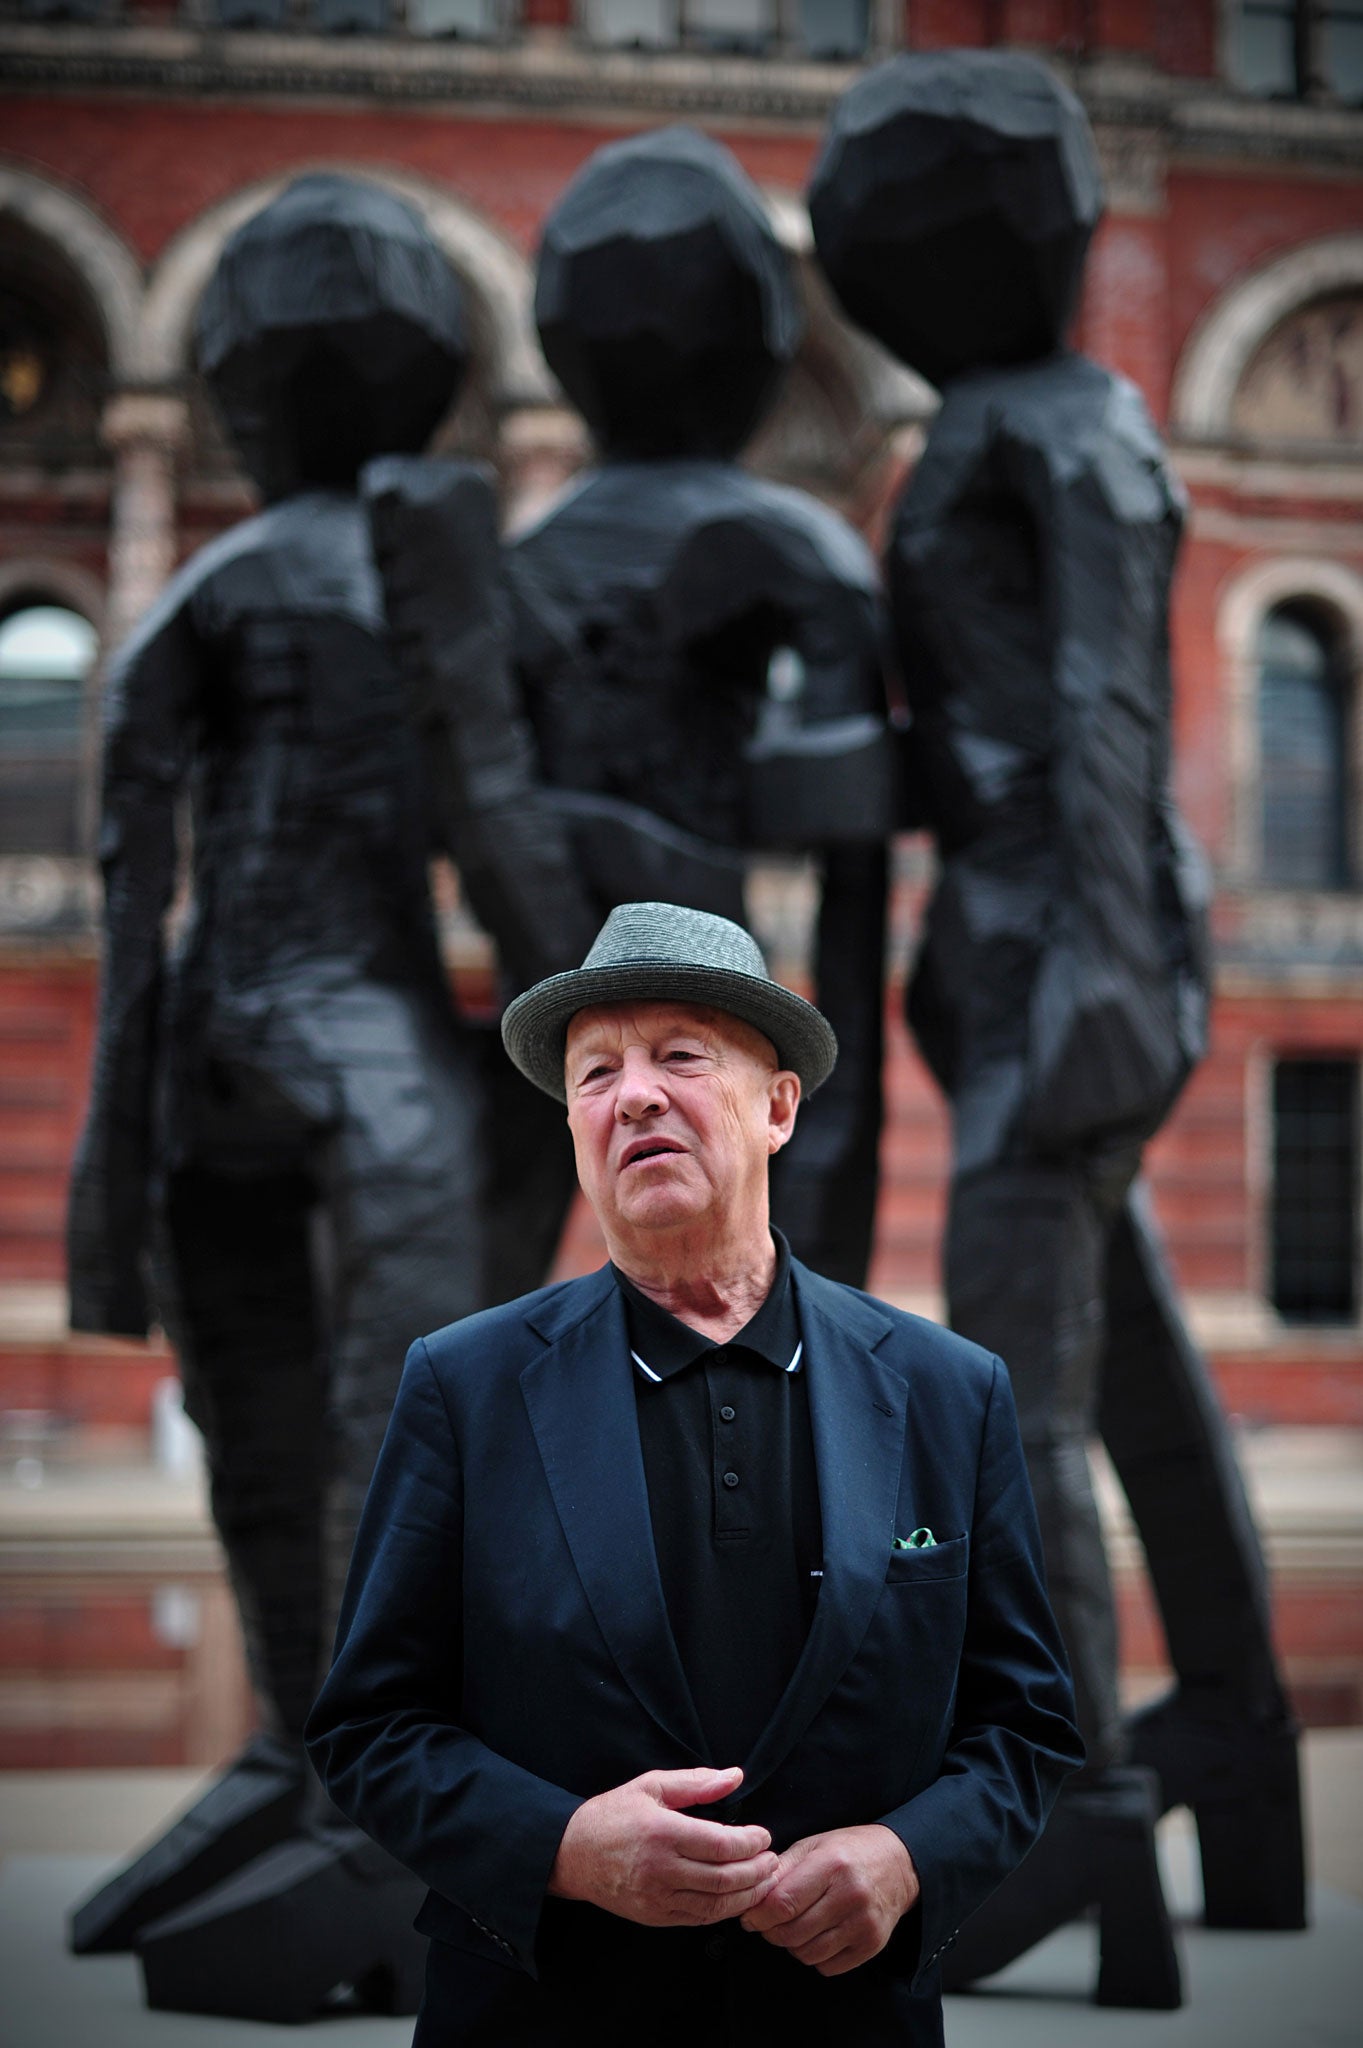 Baselitz says: 'Everything is boring apart from art. Everyone is working on being unforgotten. In an encyclopaedia, artists are beacons among all the terrible other people'